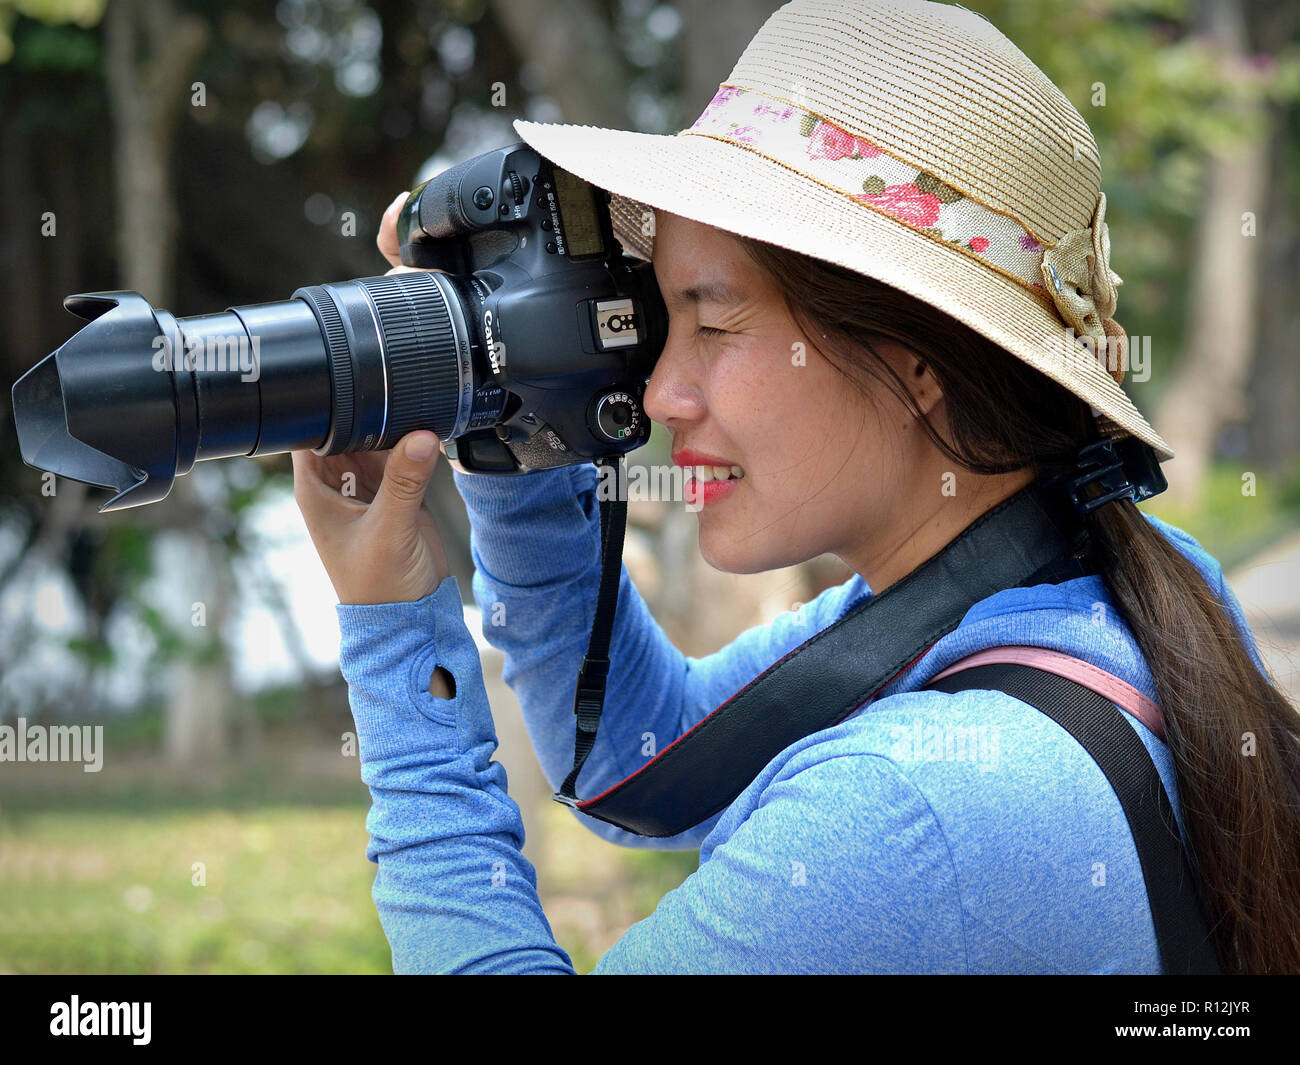 Female Vietnamese professional portrait photographer takes an outdoor portrait photo with her Canon EOS 7D DSLR camera. Stock Photo